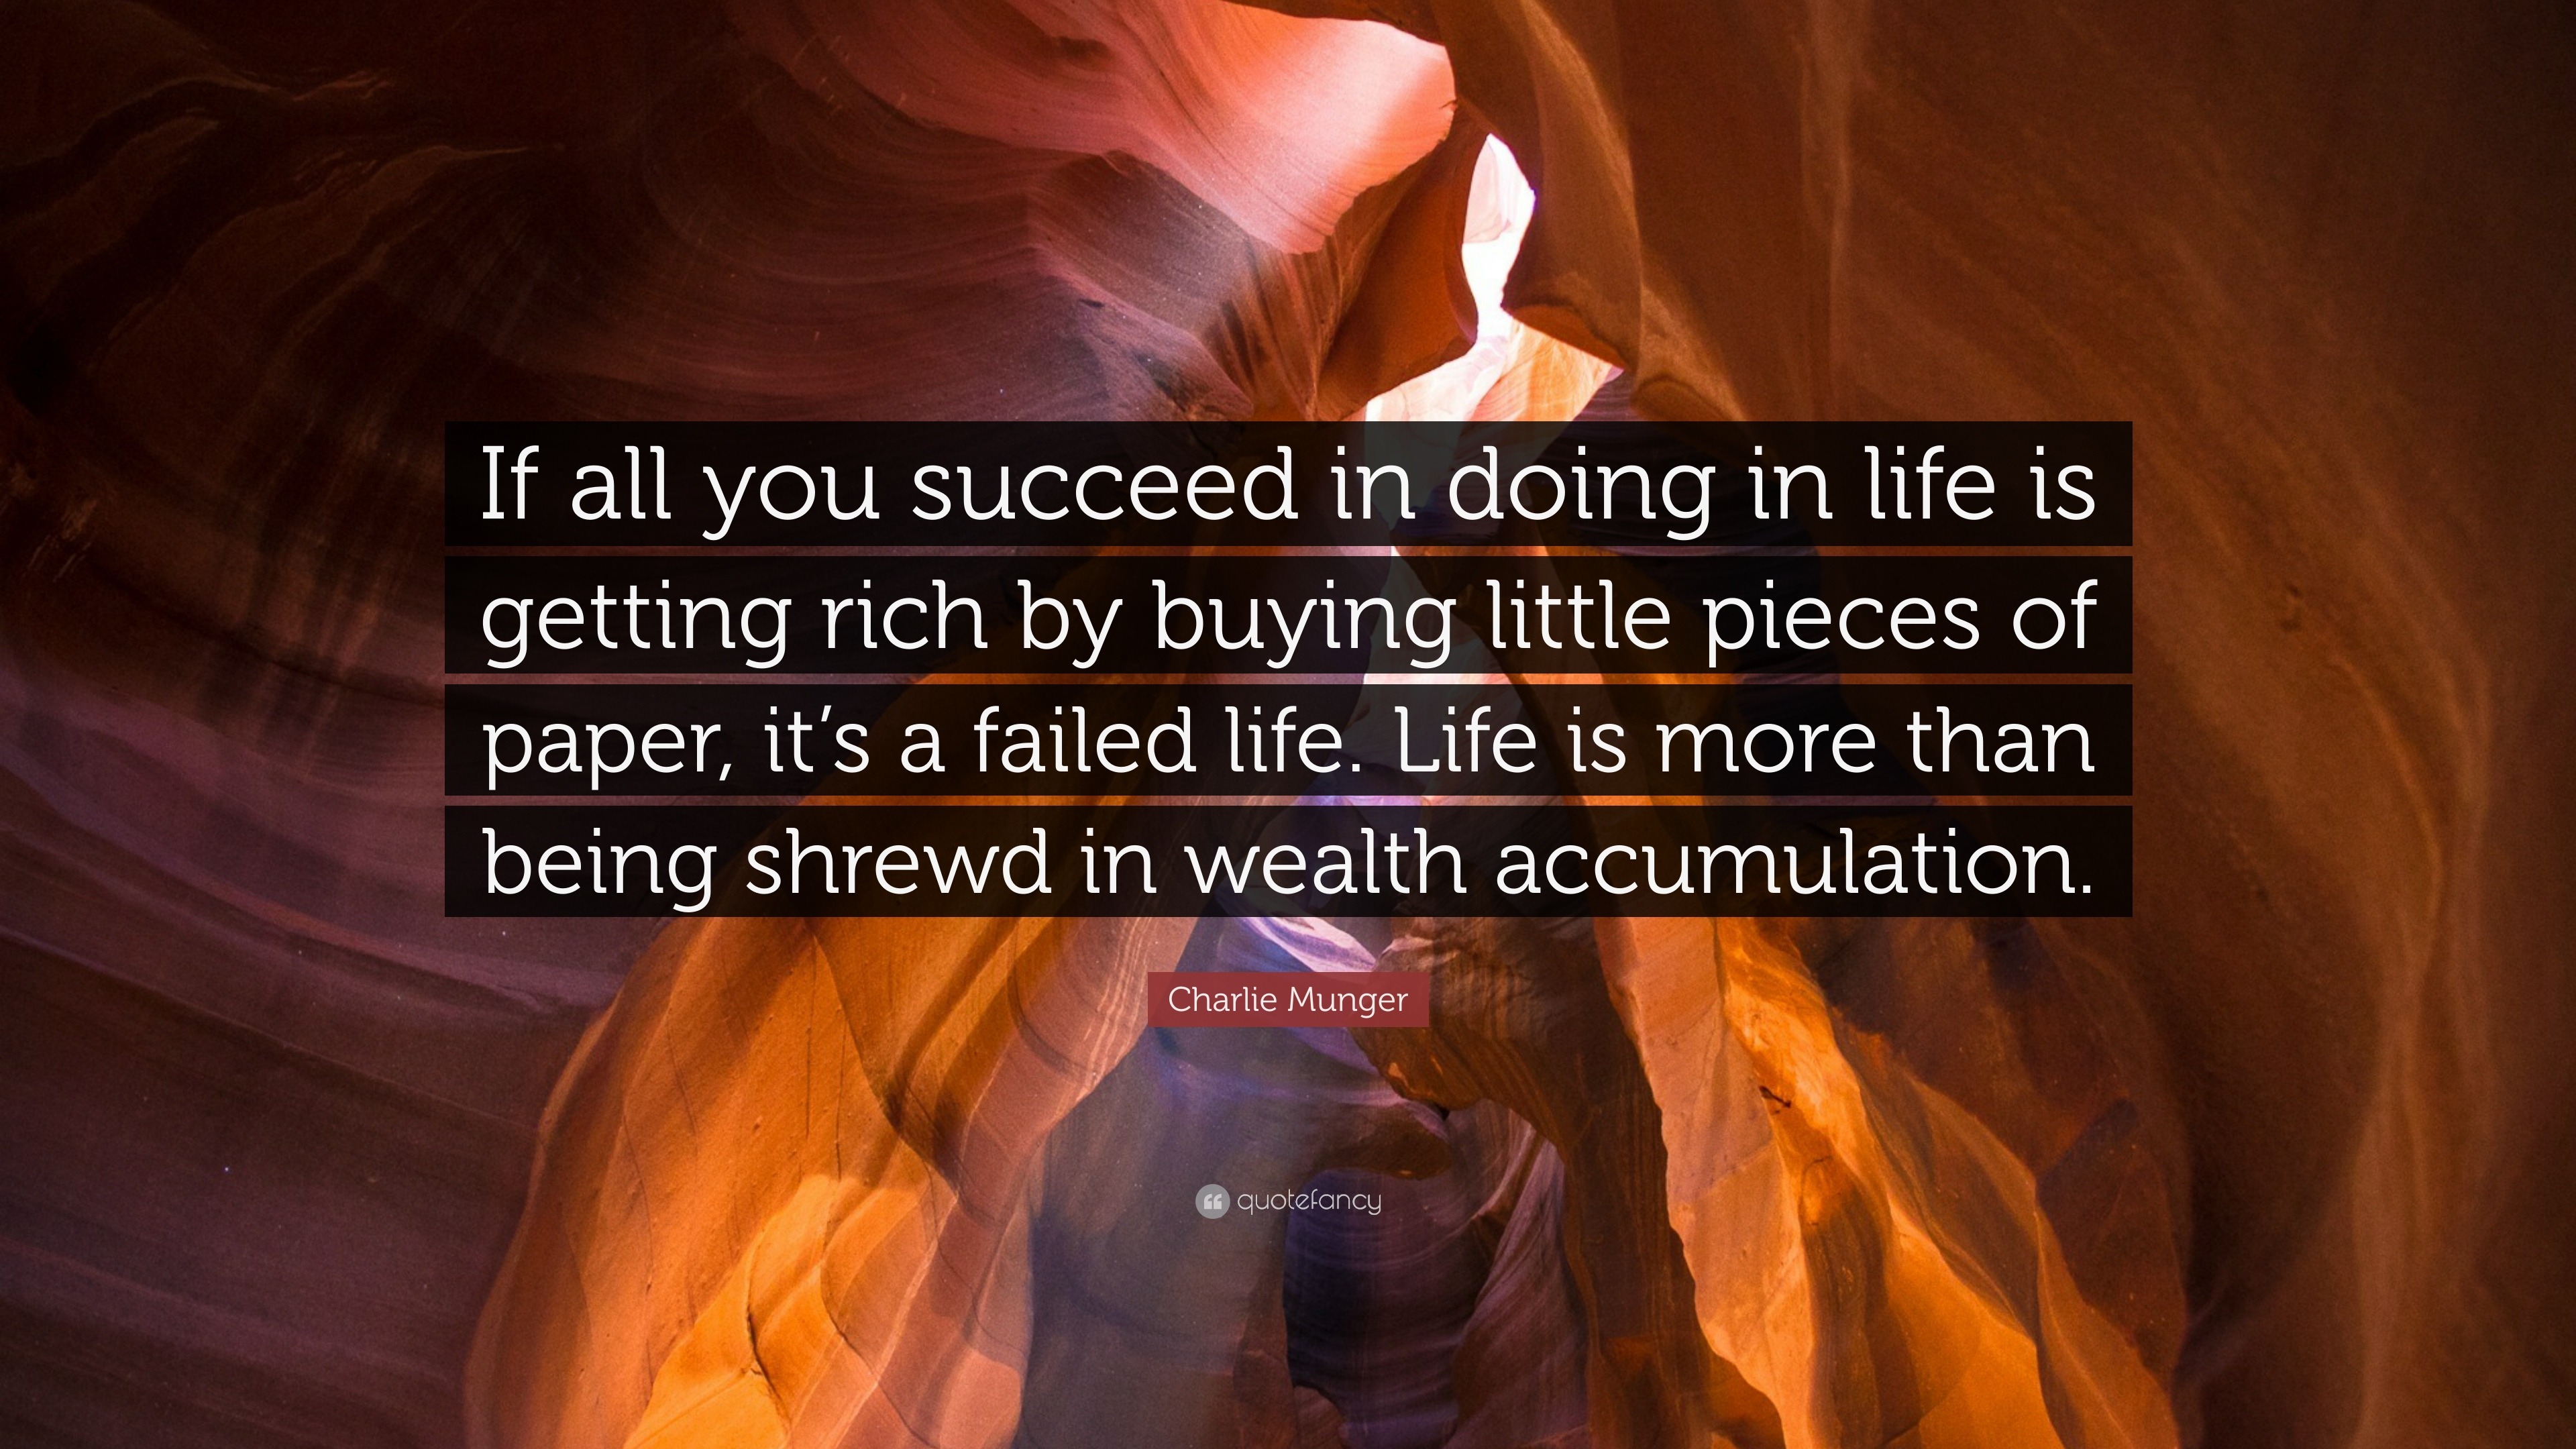 Charlie Munger Quote: “If All You Succeed In Doing In Life Is Getting Rich By Buying Little Pieces Of Paper, It's A Failed Life. Life Is More T...”